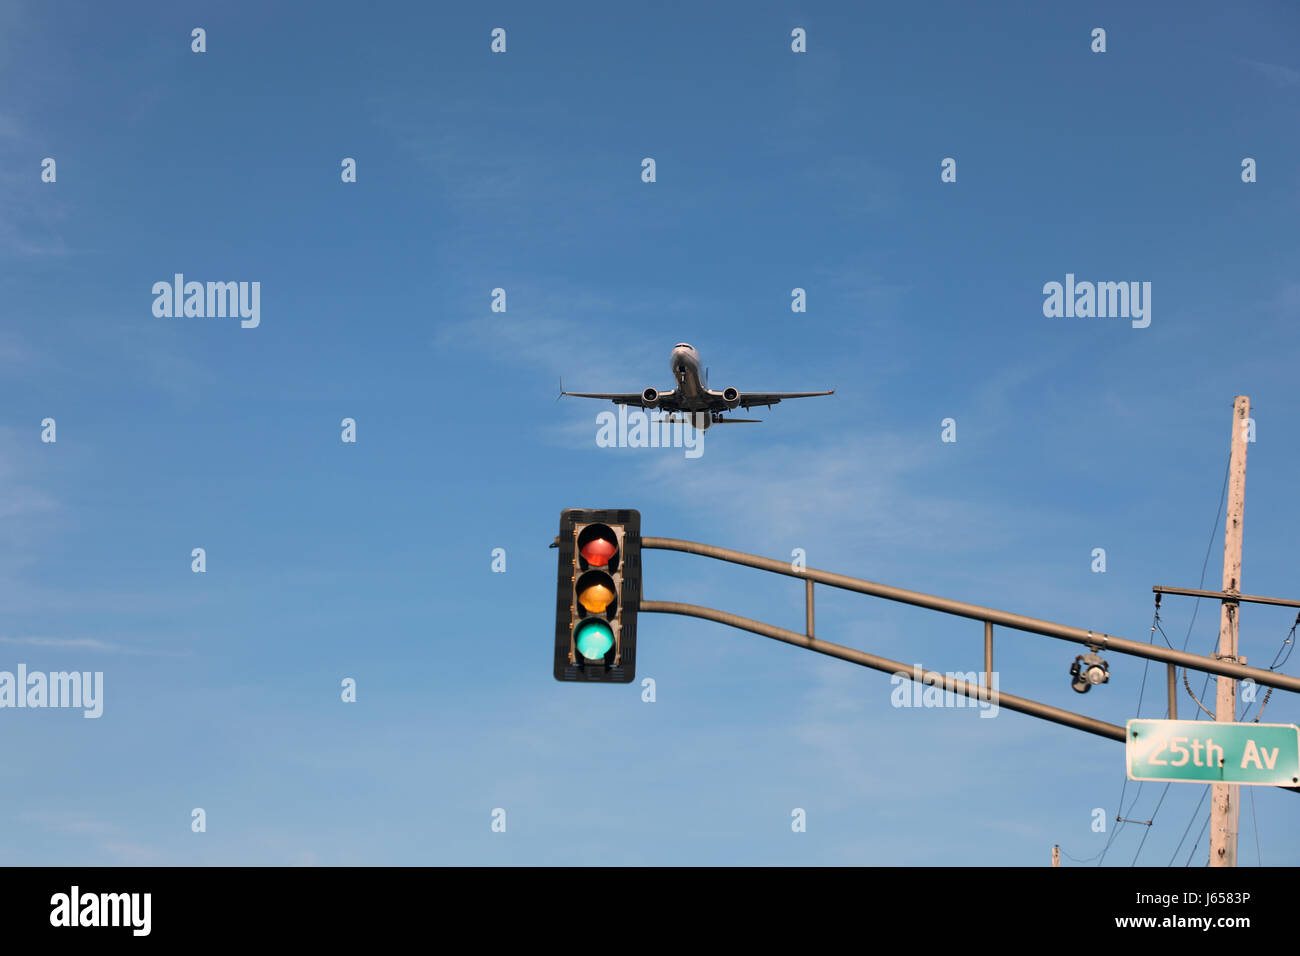 Airplane in the sky. Stock Photo